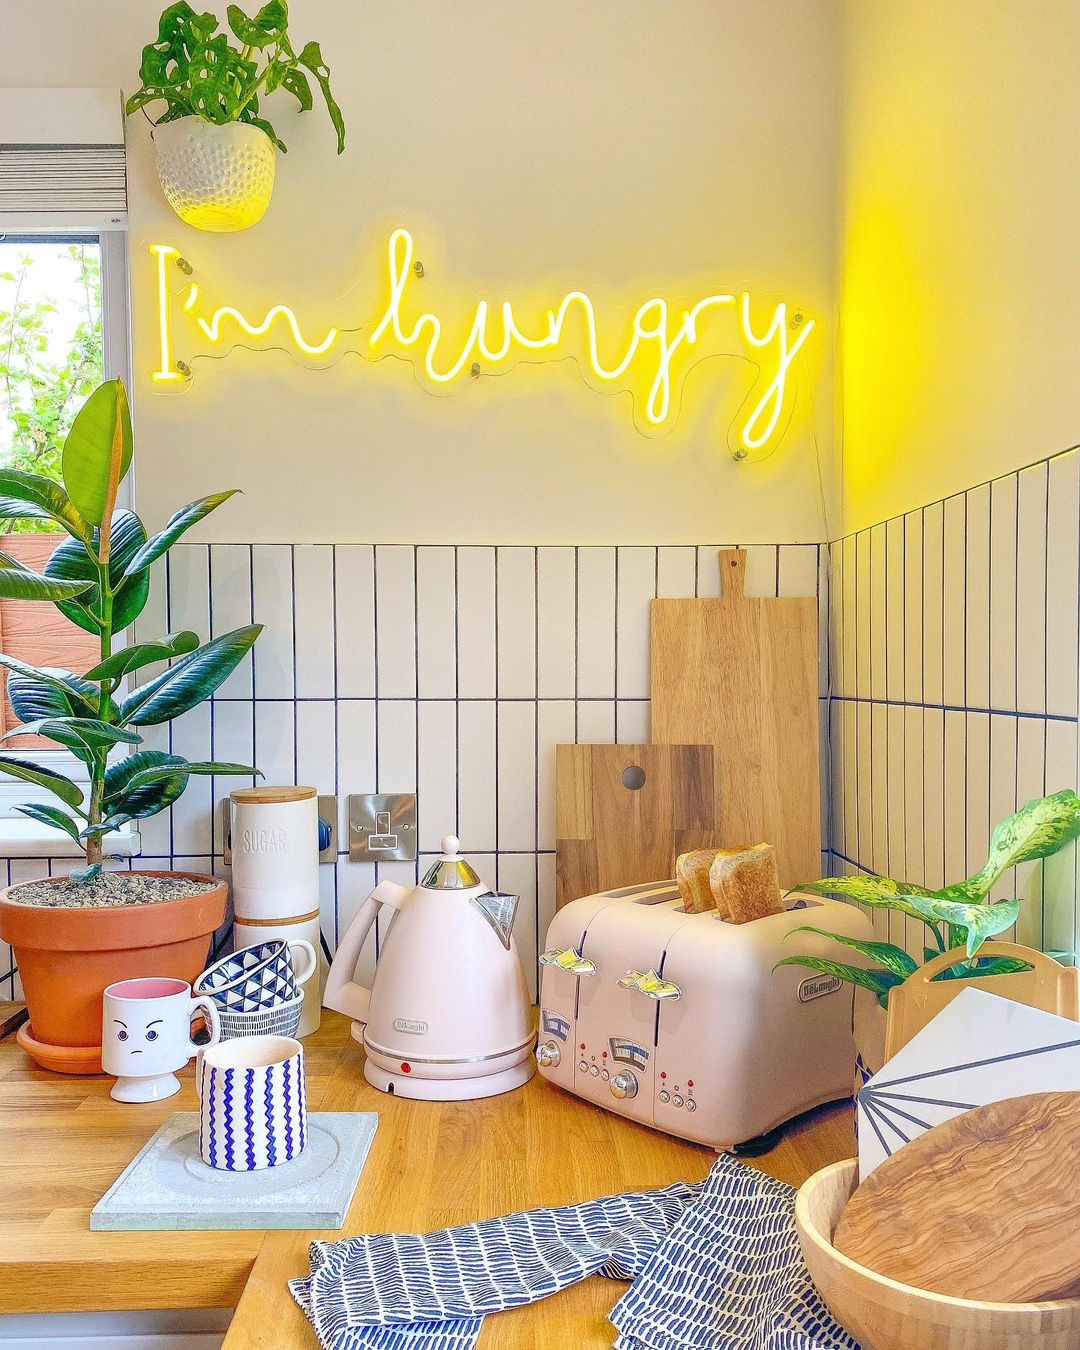 Kitchen with Yellow Neon Sign that Says I'm Hungry. Photo by Instagram user @the_cheerful_abode